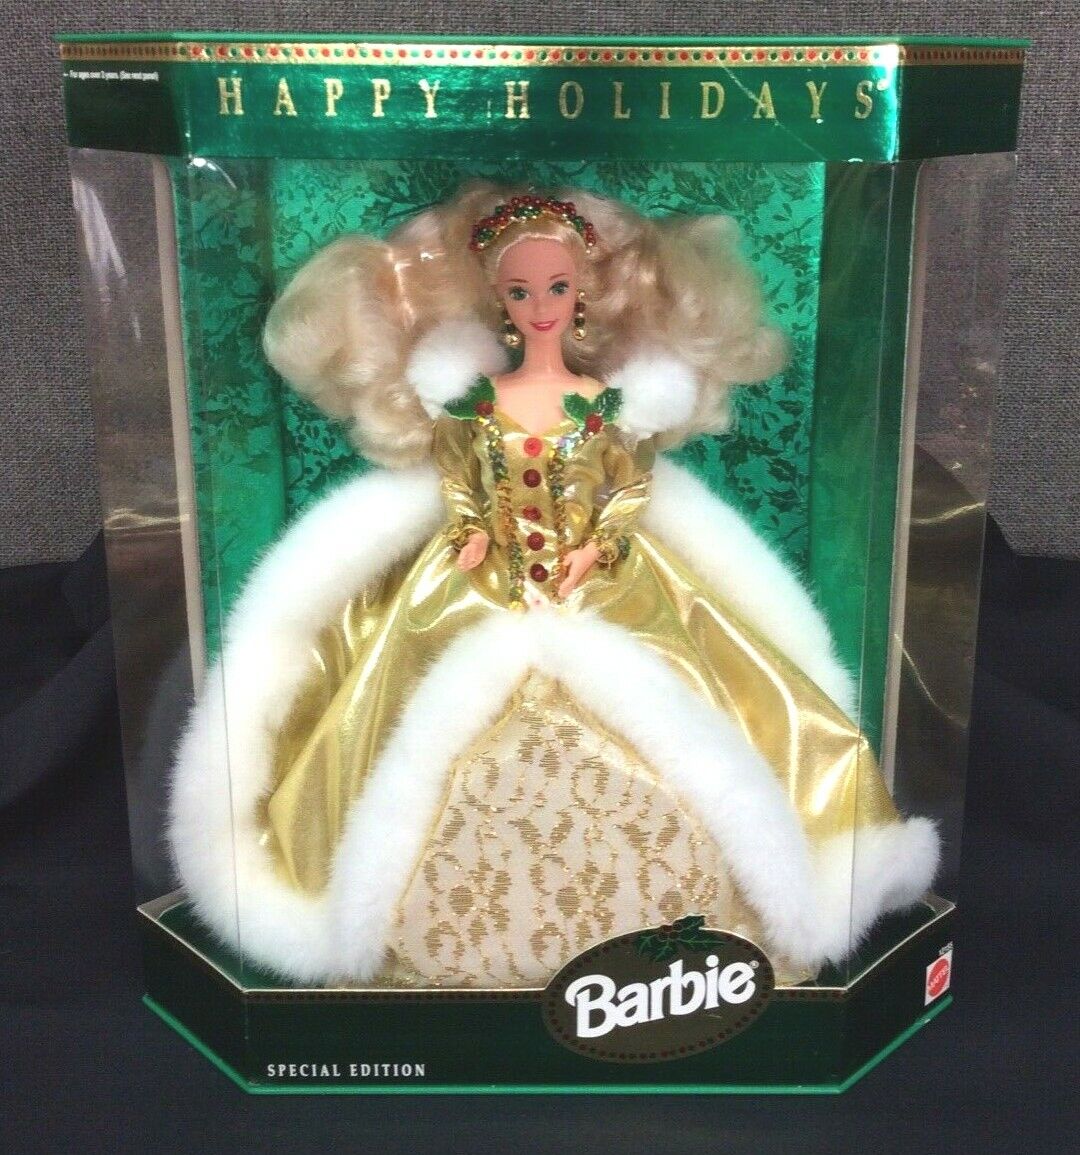 Happy Holidays 1994 Barbie Doll for sale online 